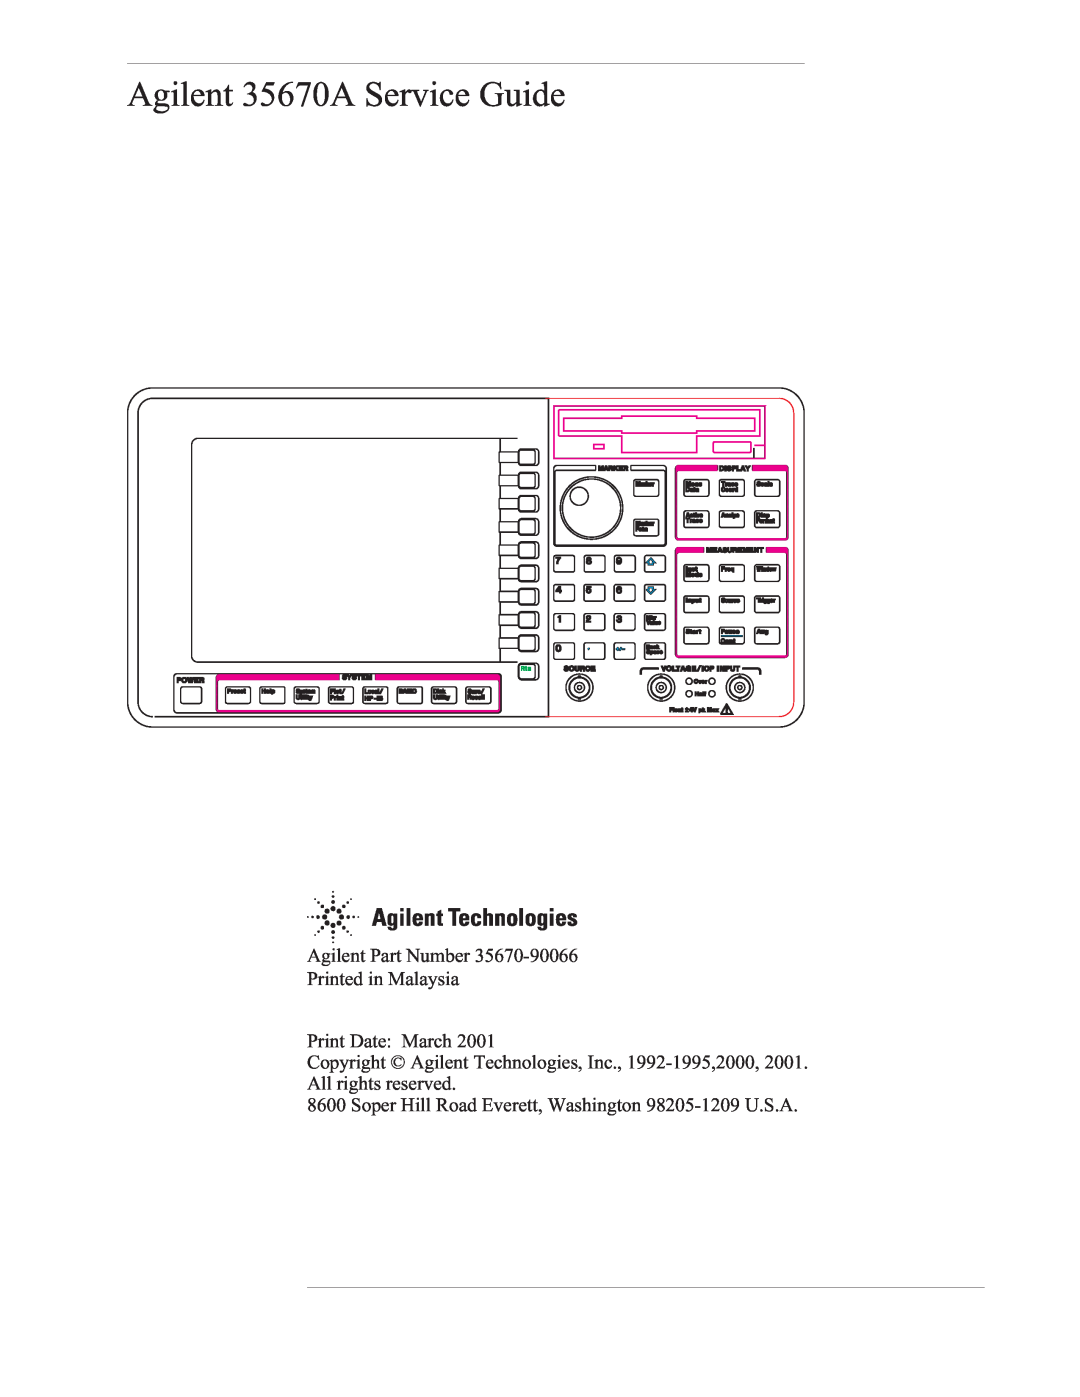 Agilent Technologies 35670-90066 manual Agilent 35670A Service Guide, Agilent Part Number Printed in Malaysia 